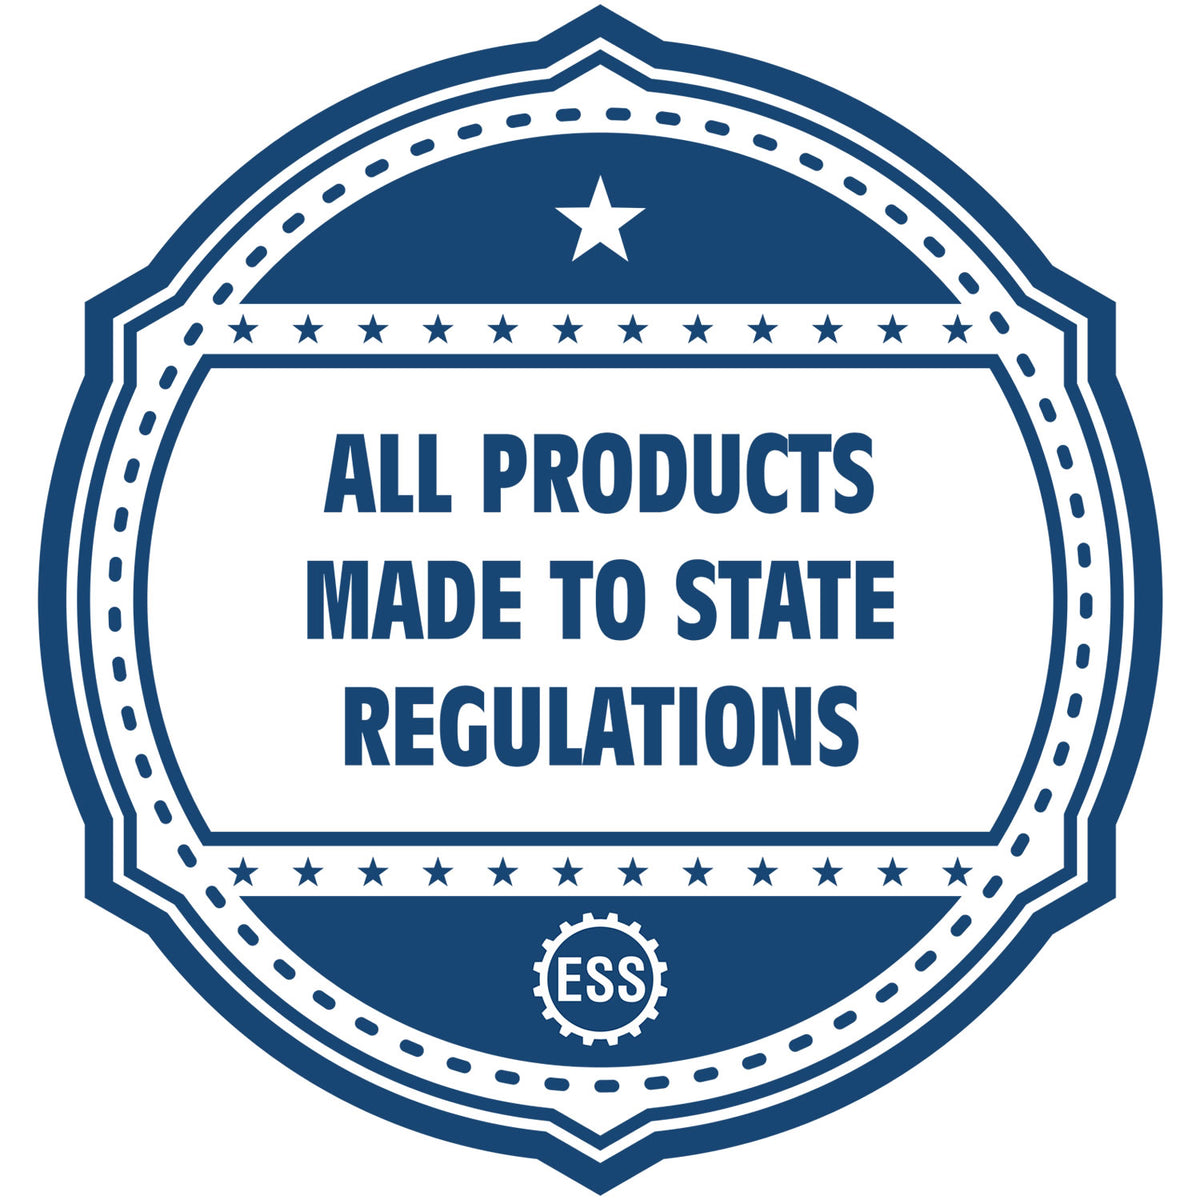 An icon or badge element for the Utah Professional Engineer Seal Stamp showing that this product is made in compliance with state regulations.